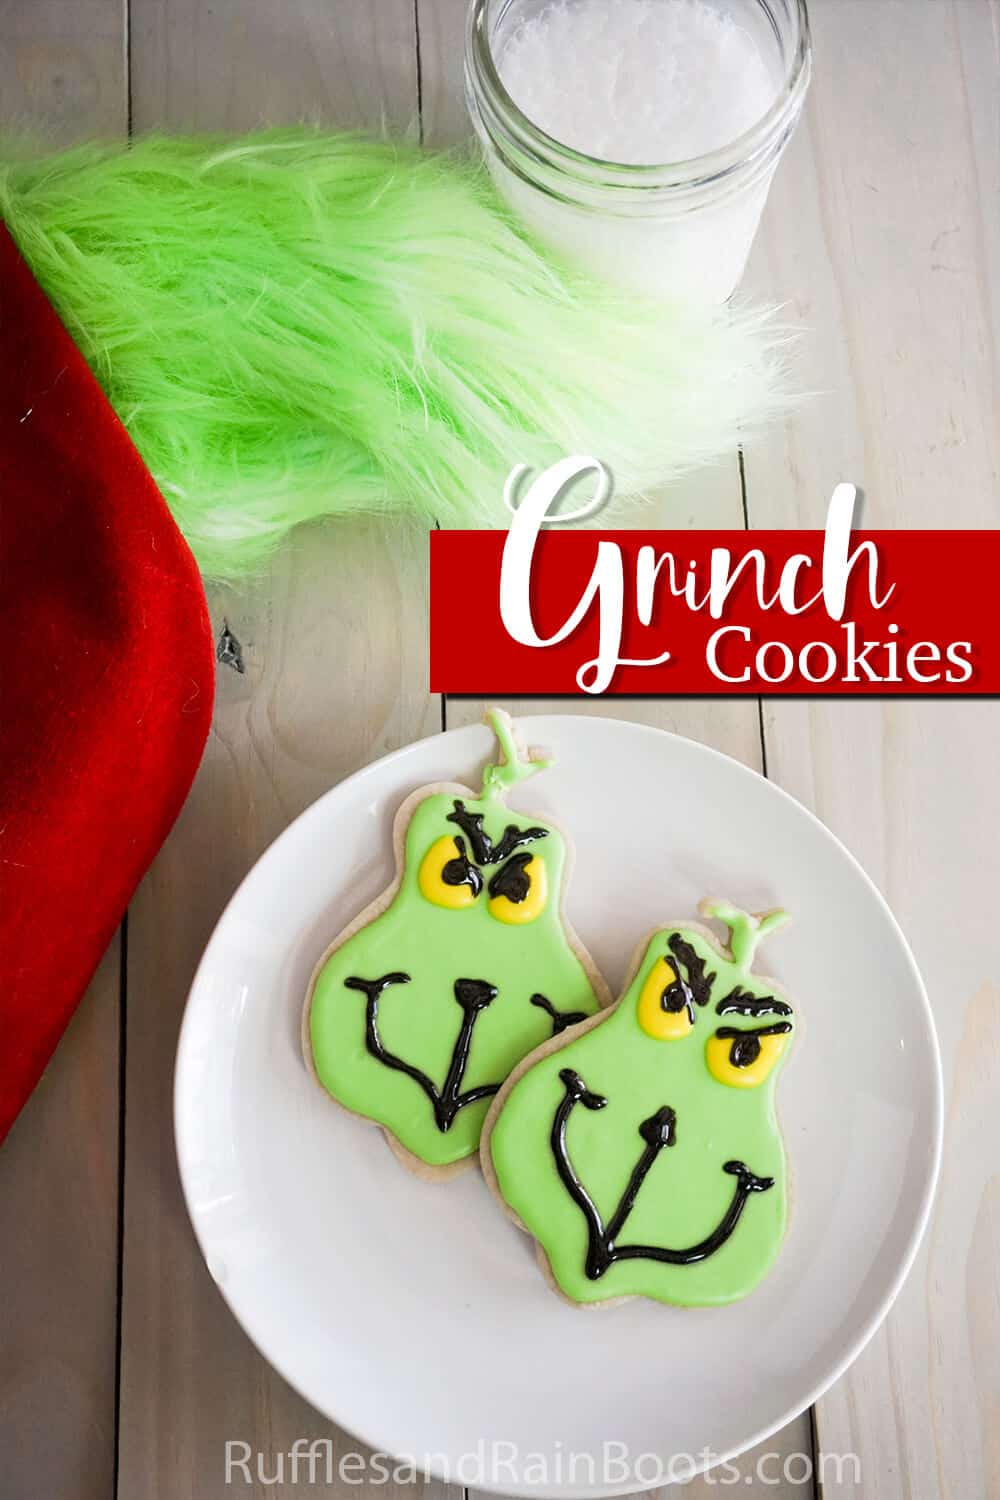 sugar cookies decorated as the grinch with text which reads grinch cookies